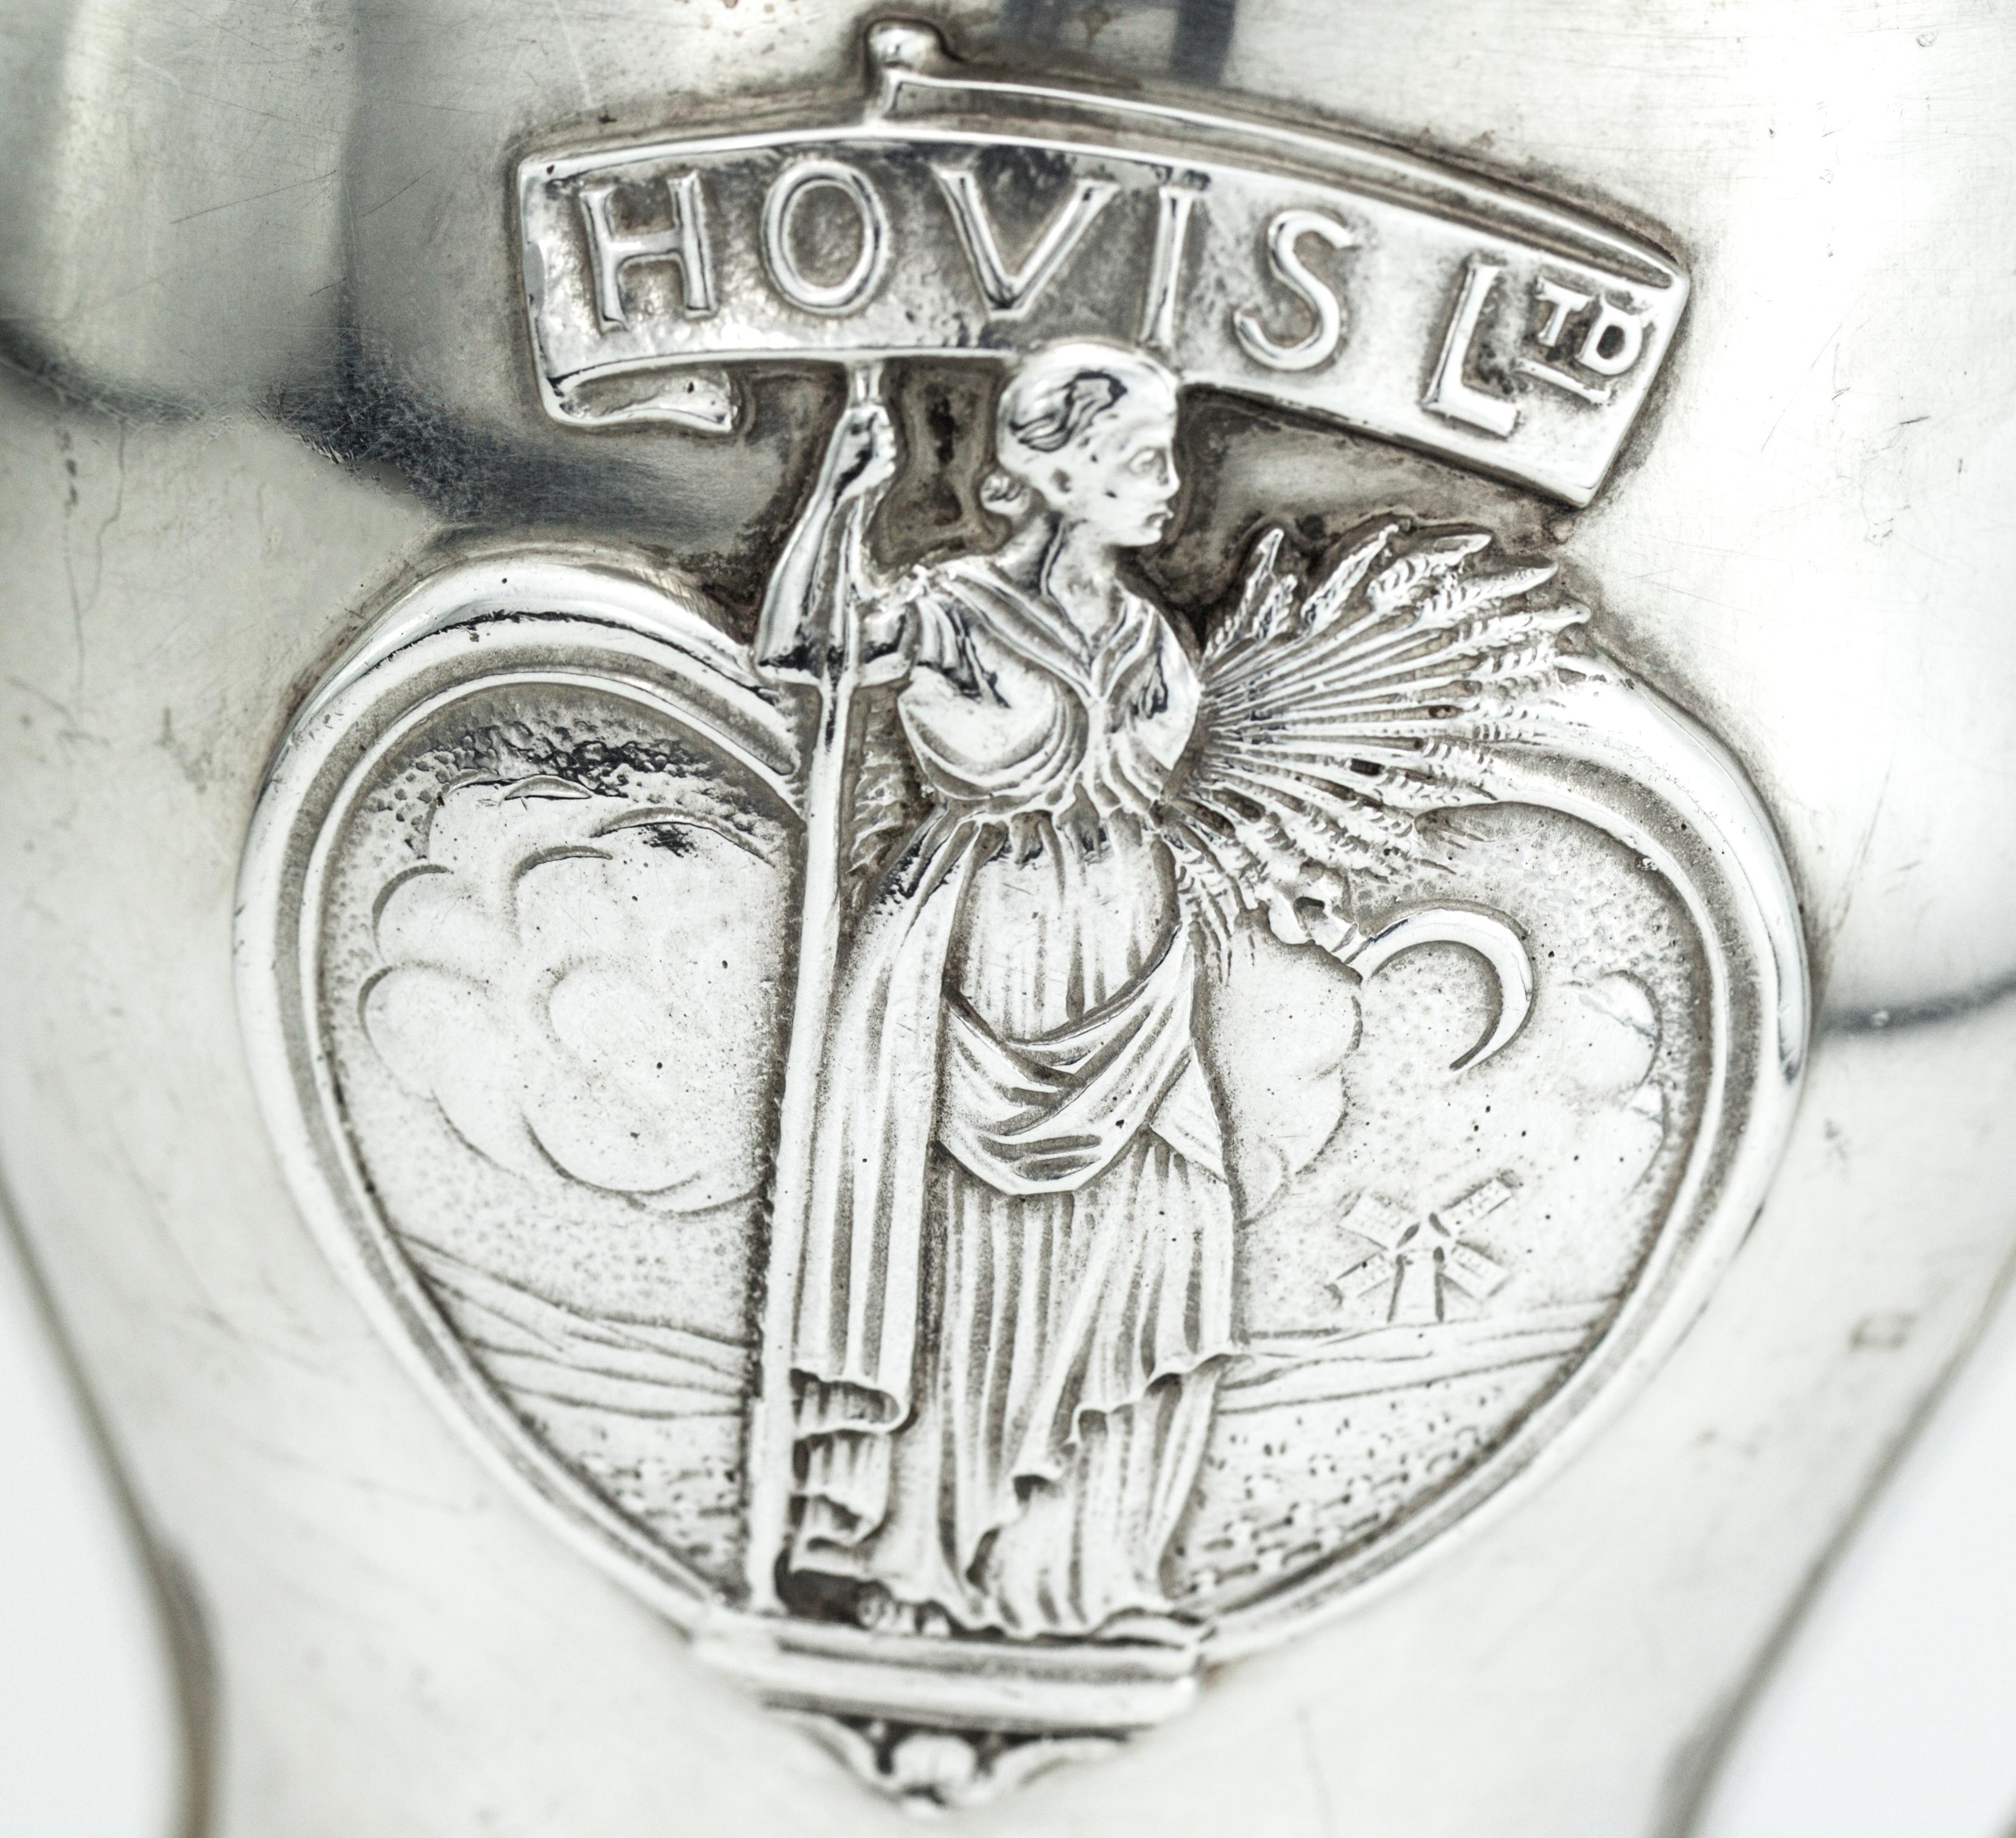 Antique Sterling Silver HOVIS Ltd. Trophy In Excellent Condition For Sale In Braintree, GB